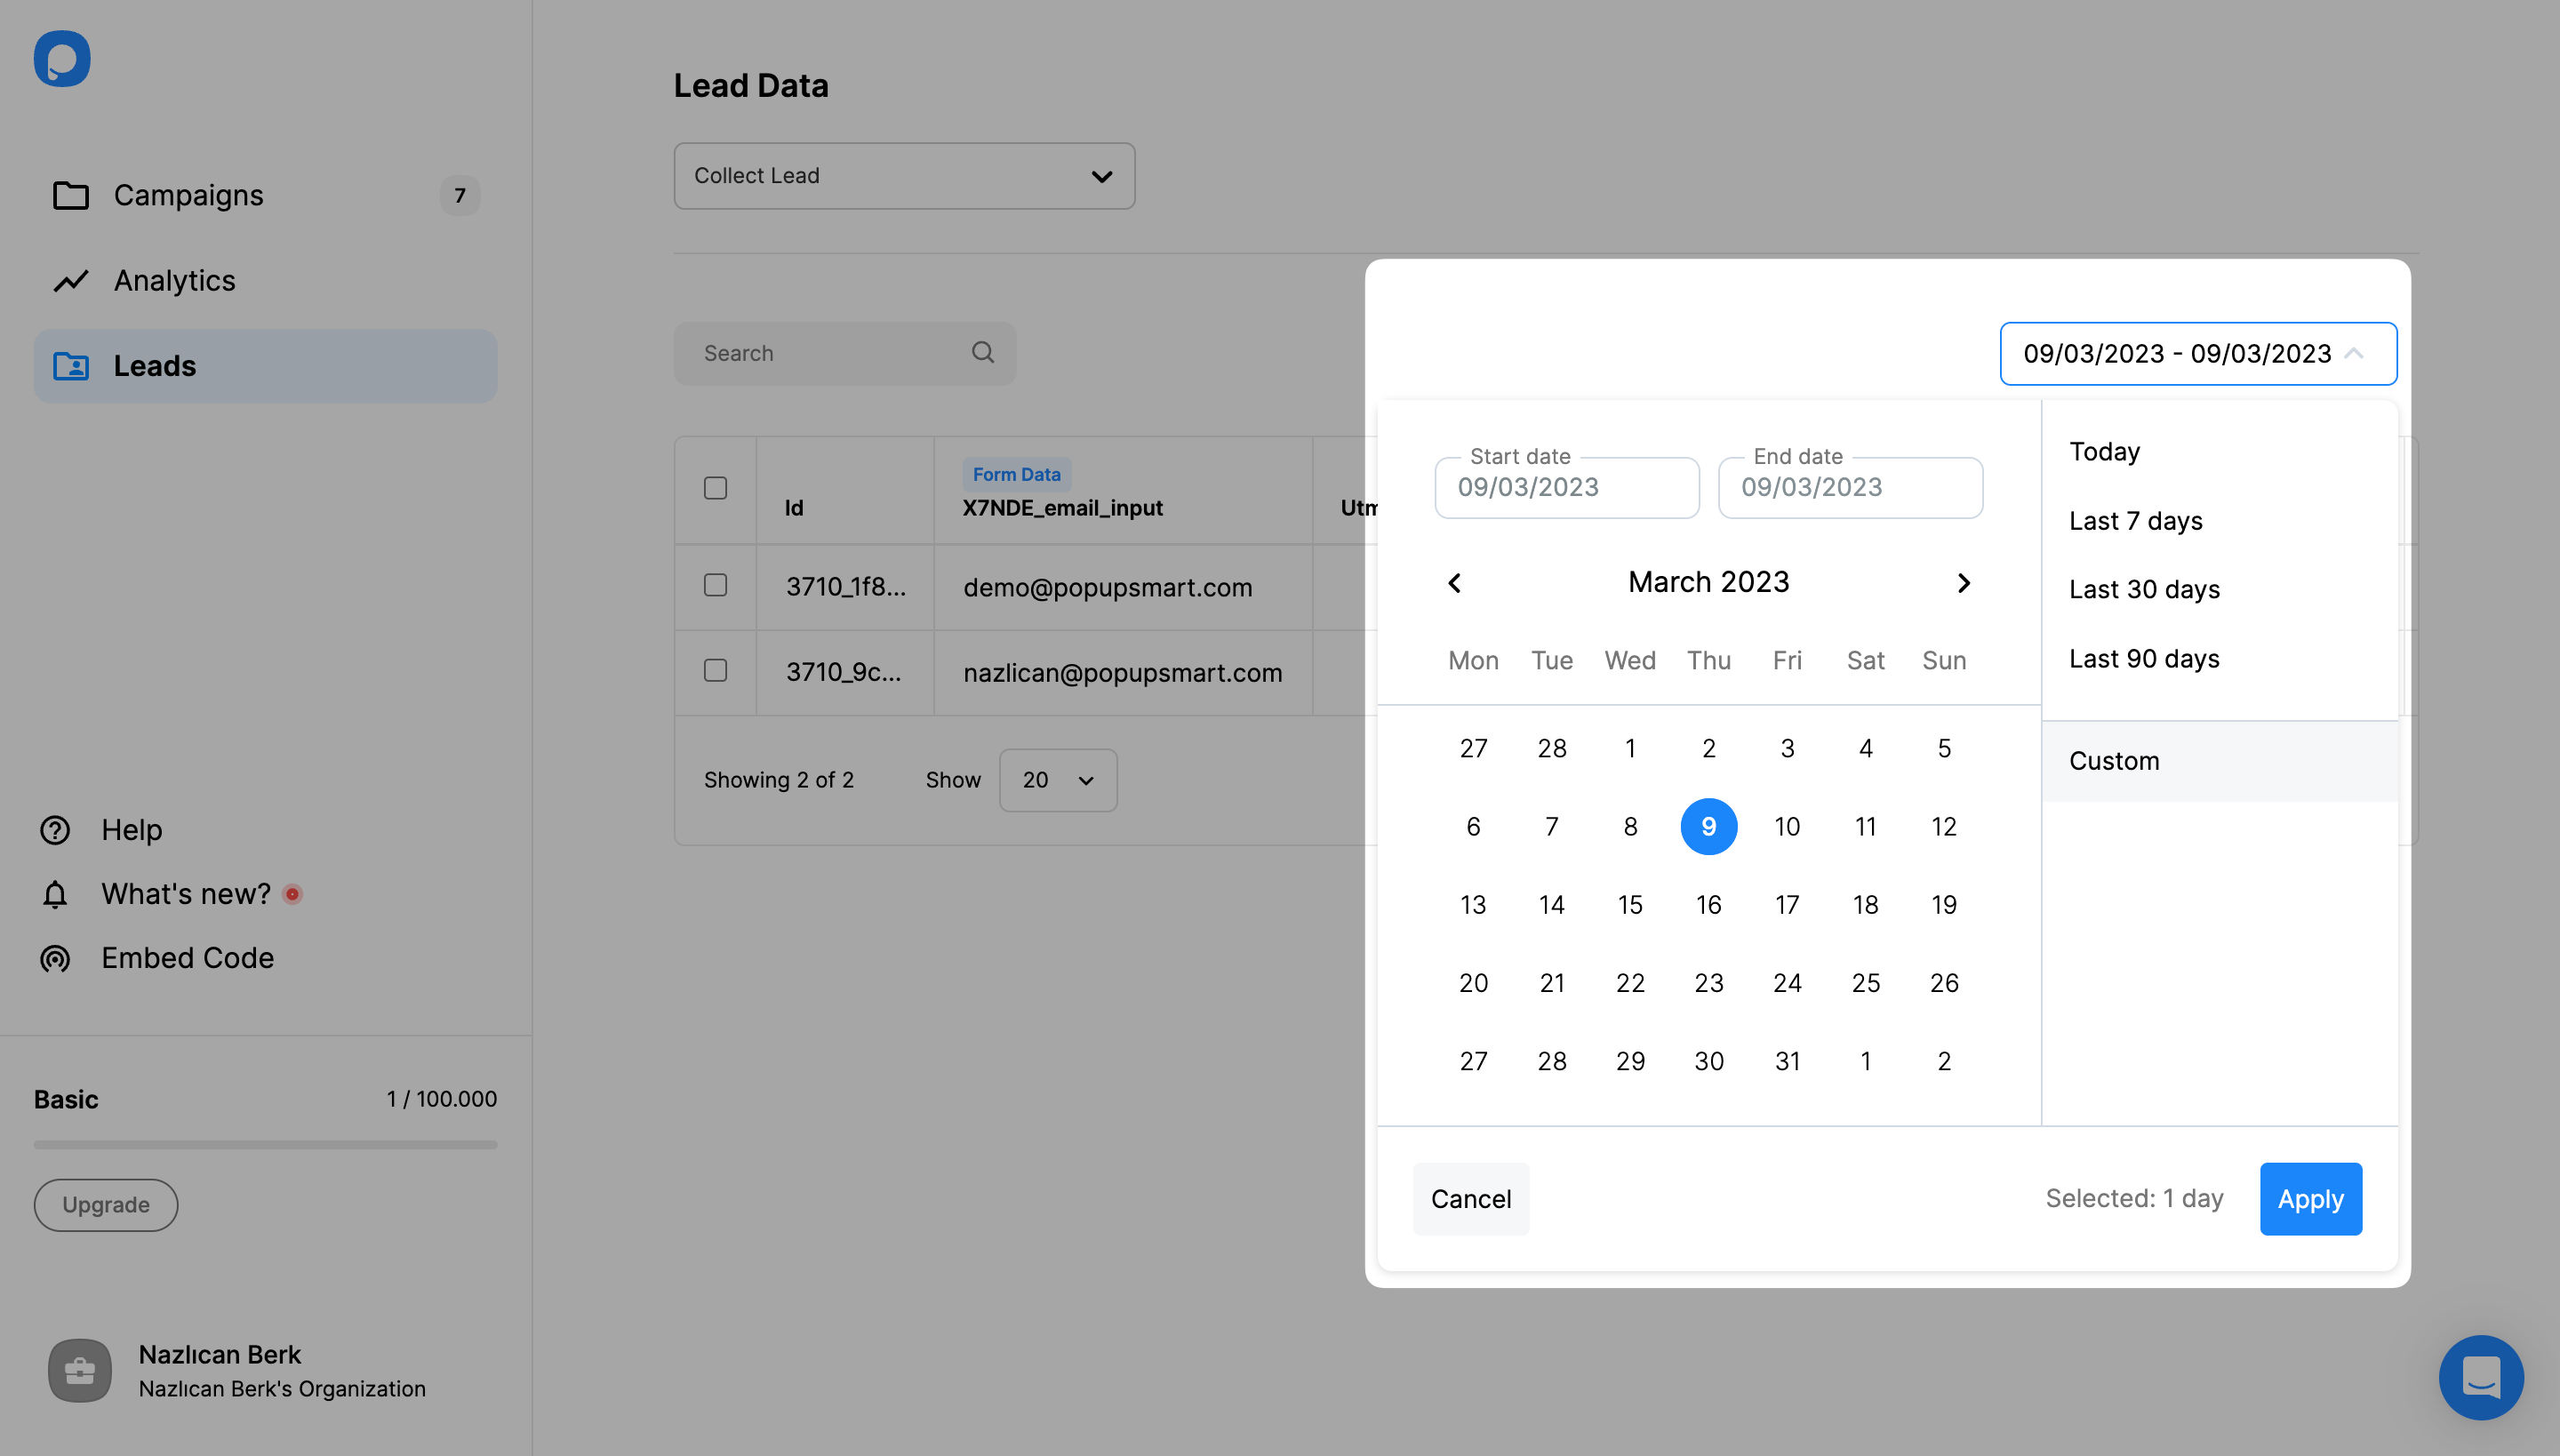 lead data time filter